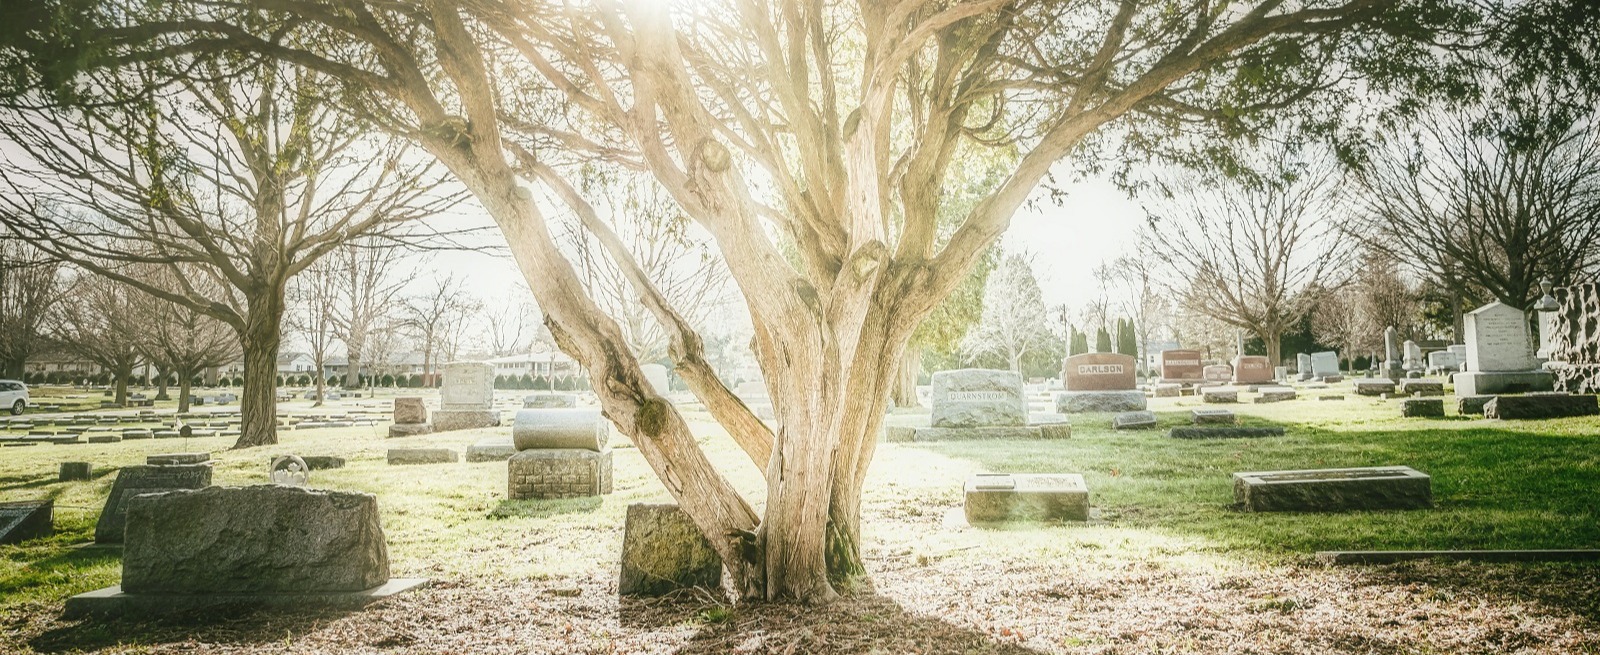 image of cemetery with large tree and headstones